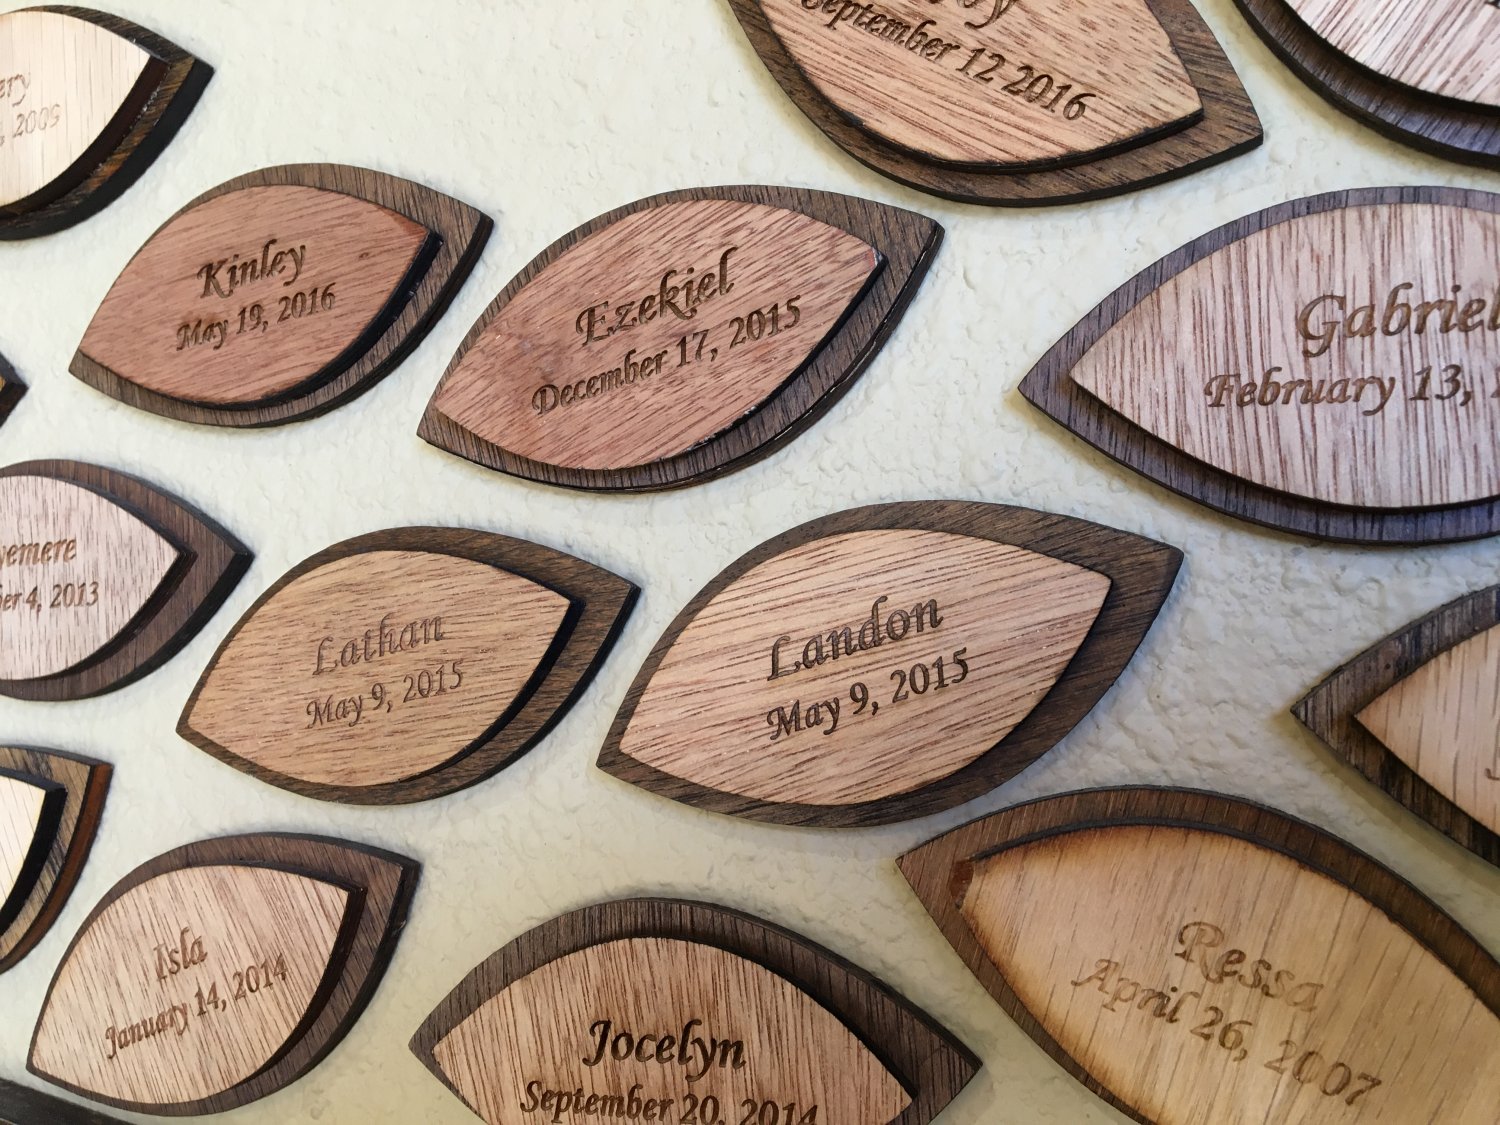 Wooden commemorative leaves engraved with babies' names and birth dates